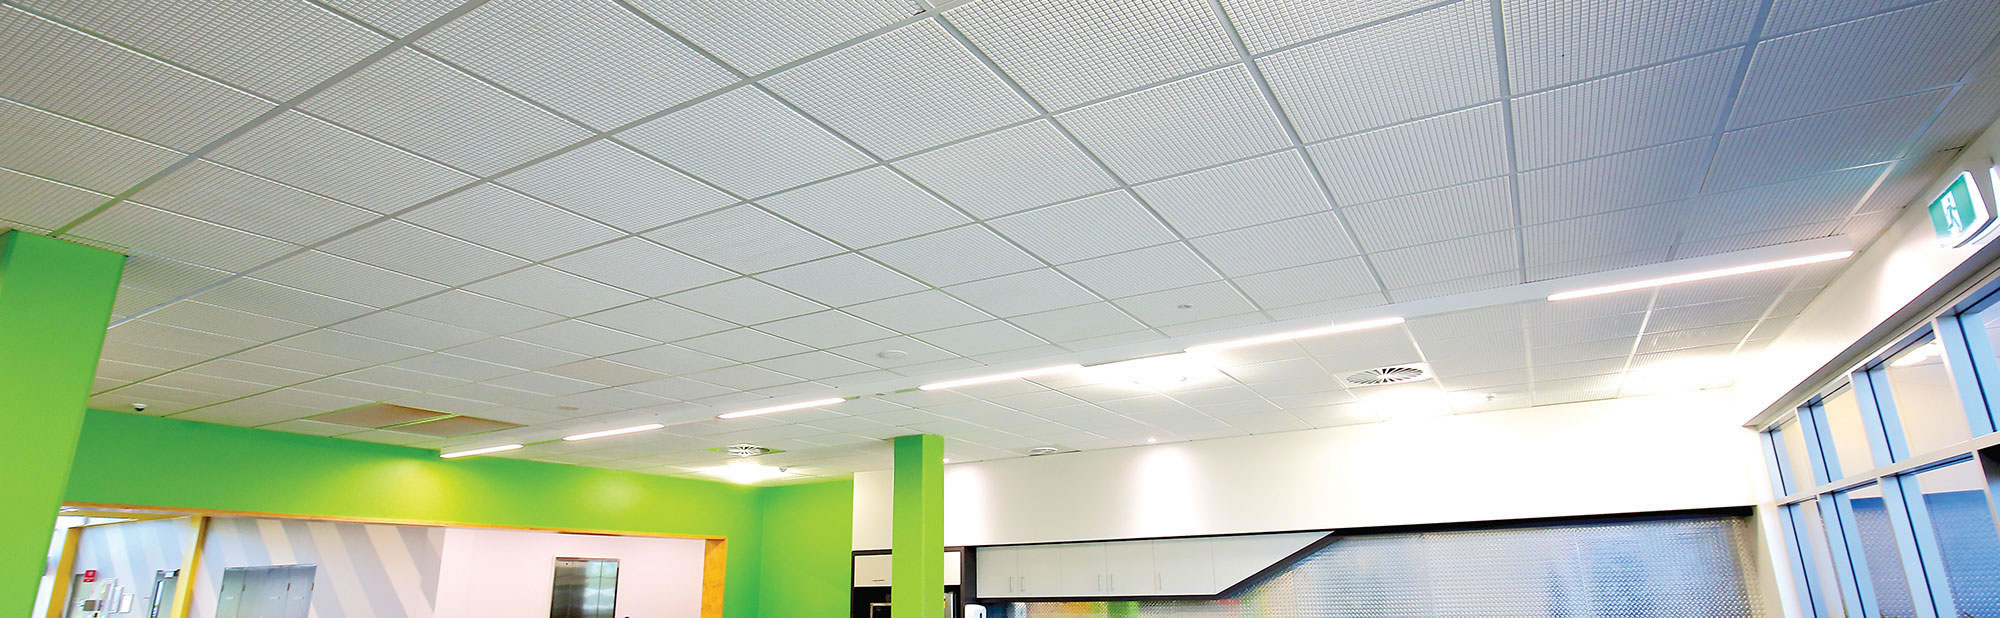 Acoustics Ceiling Panel for commercial applications 